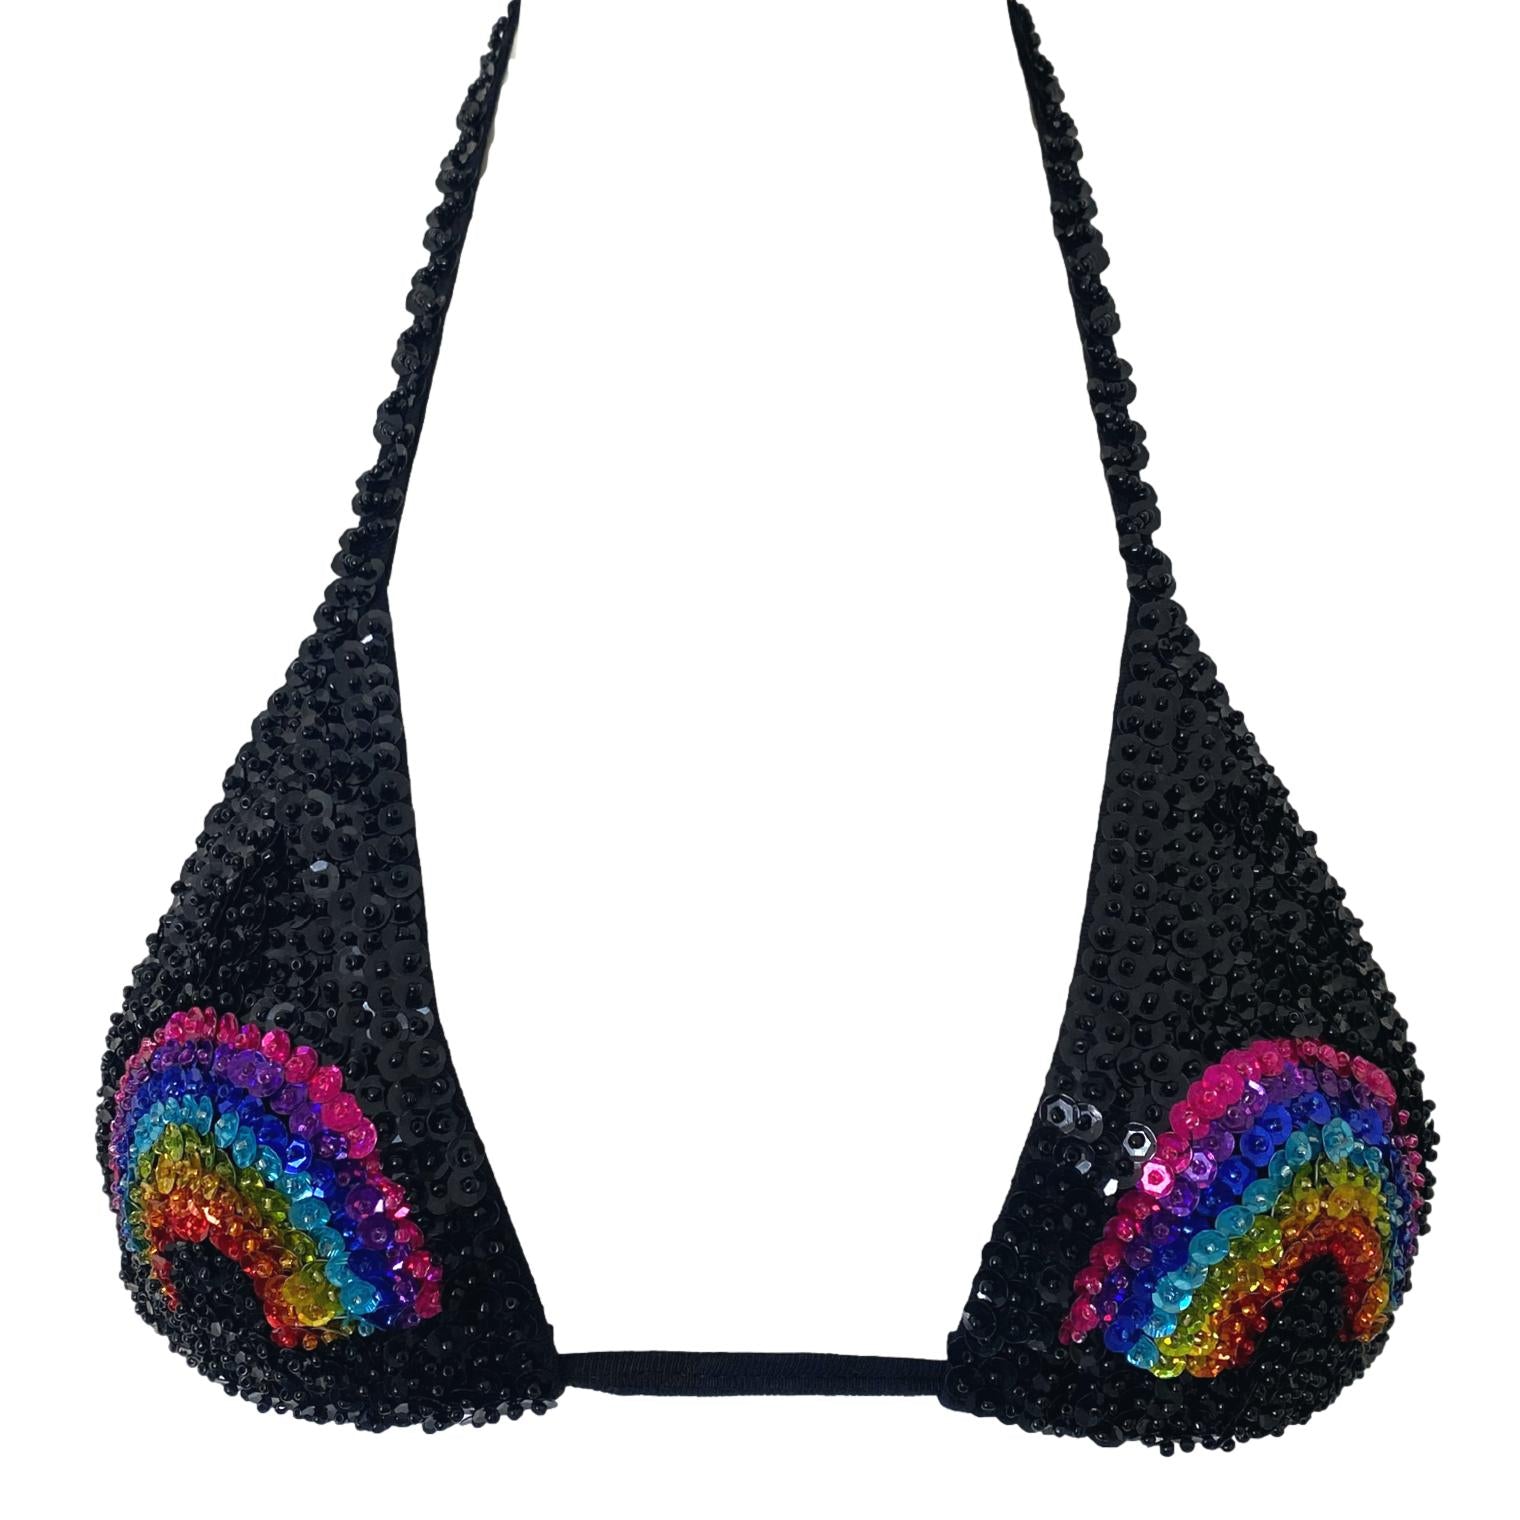 black sequin hand made triangle crop top with rainbow on the front for mardi gras or gay pride festival outfit 